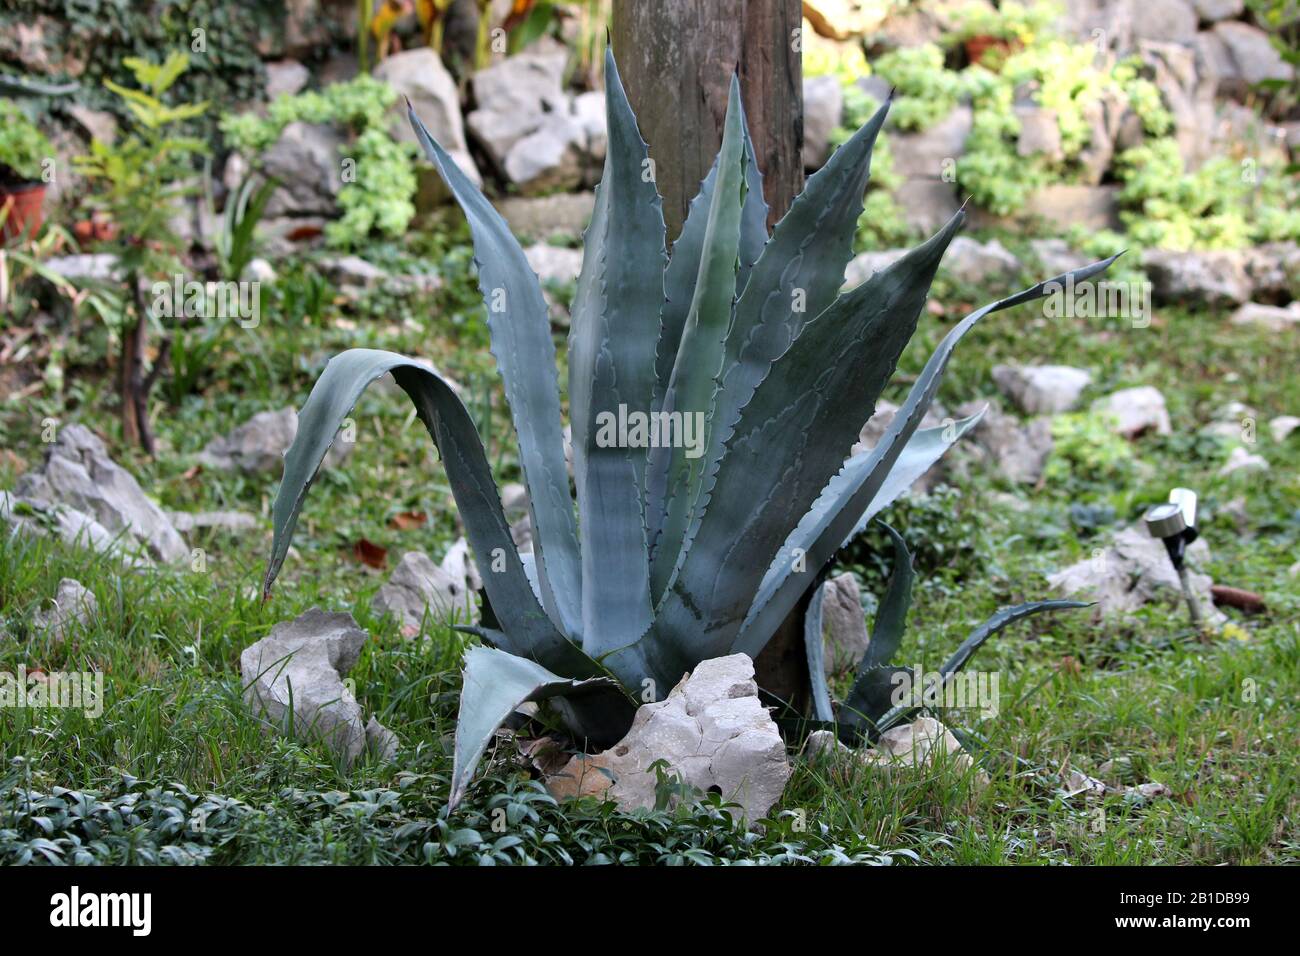 Agave monocot perennial ornamental plant dark green elongated succulent leaves with sharp marginal teeth and extremely sharp terminal spine Stock Photo